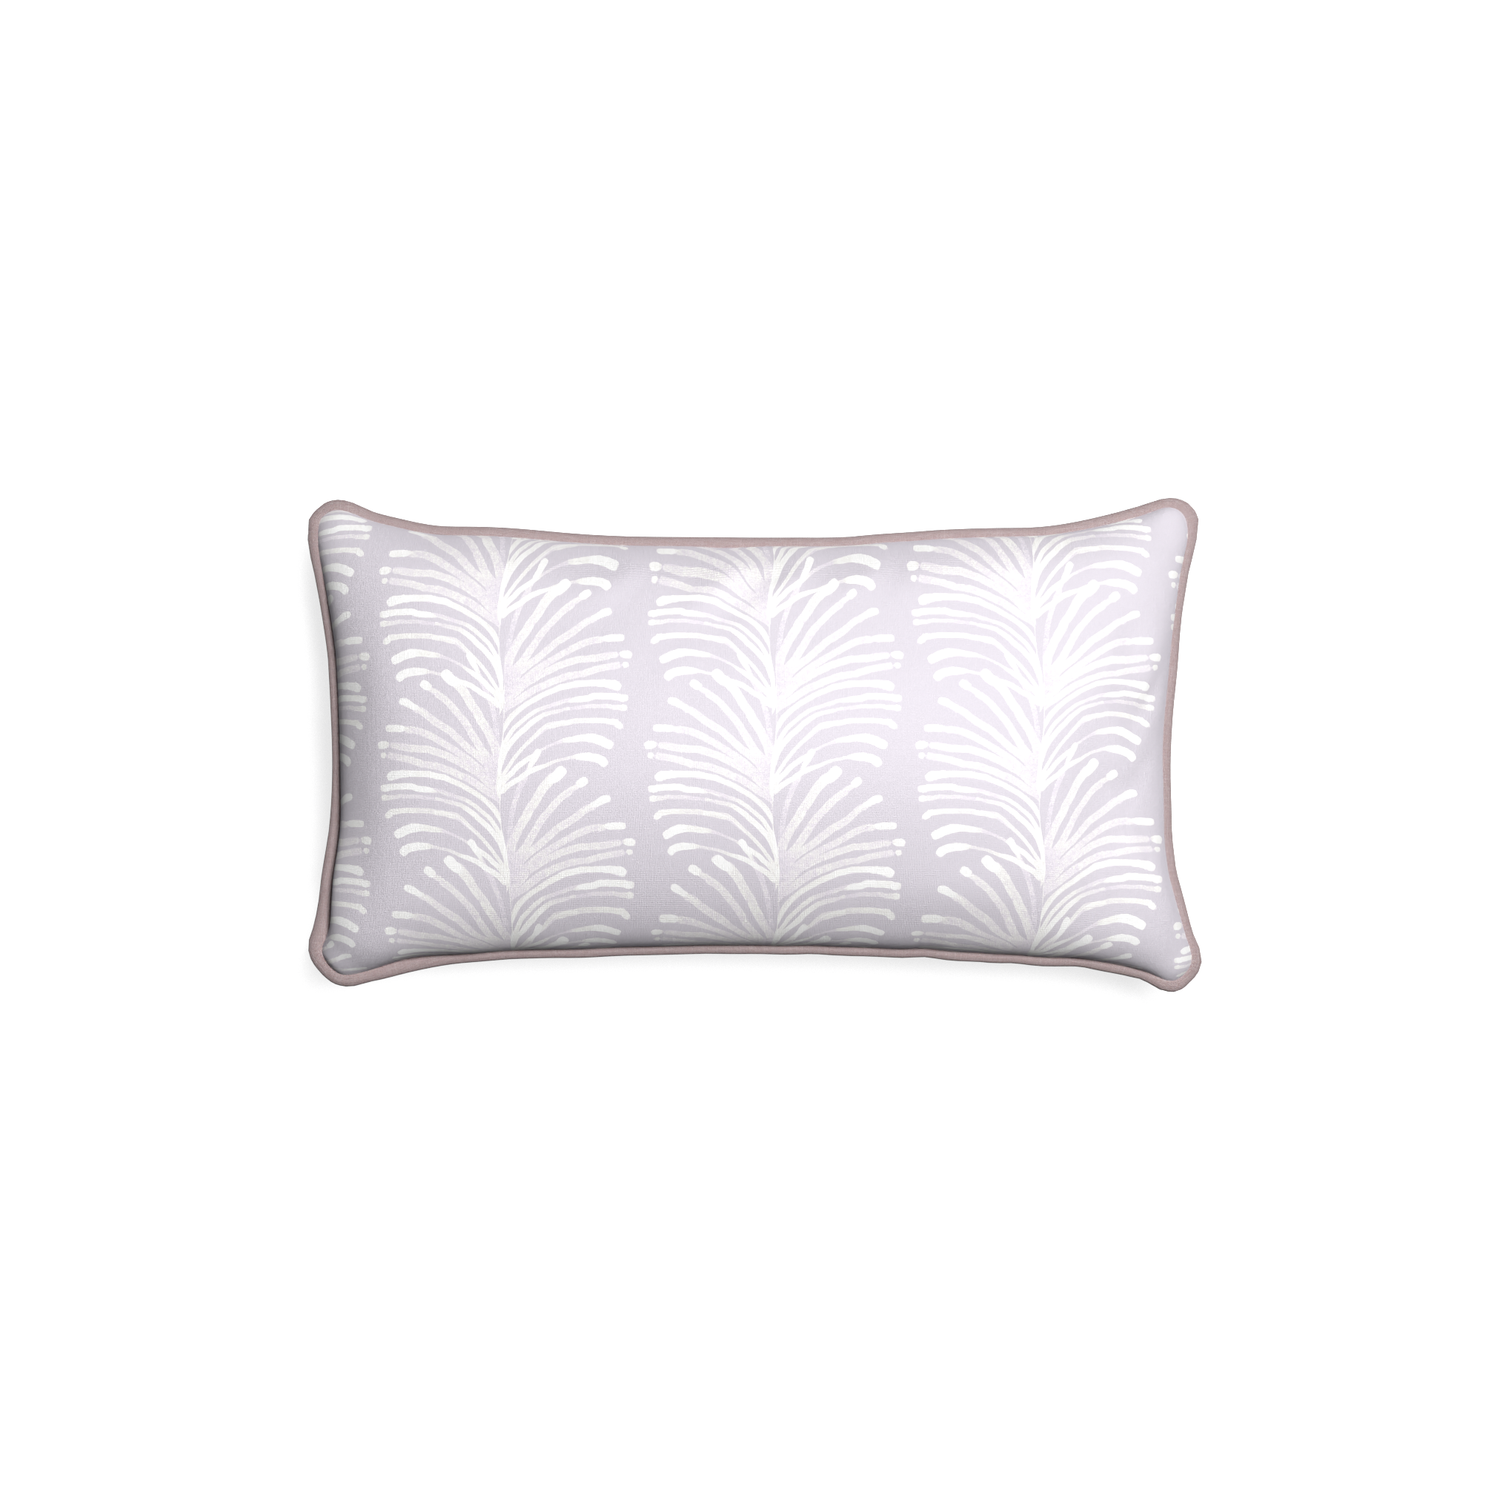 Petite-lumbar emma lavender custom lavender botanical stripepillow with orchid piping on white background